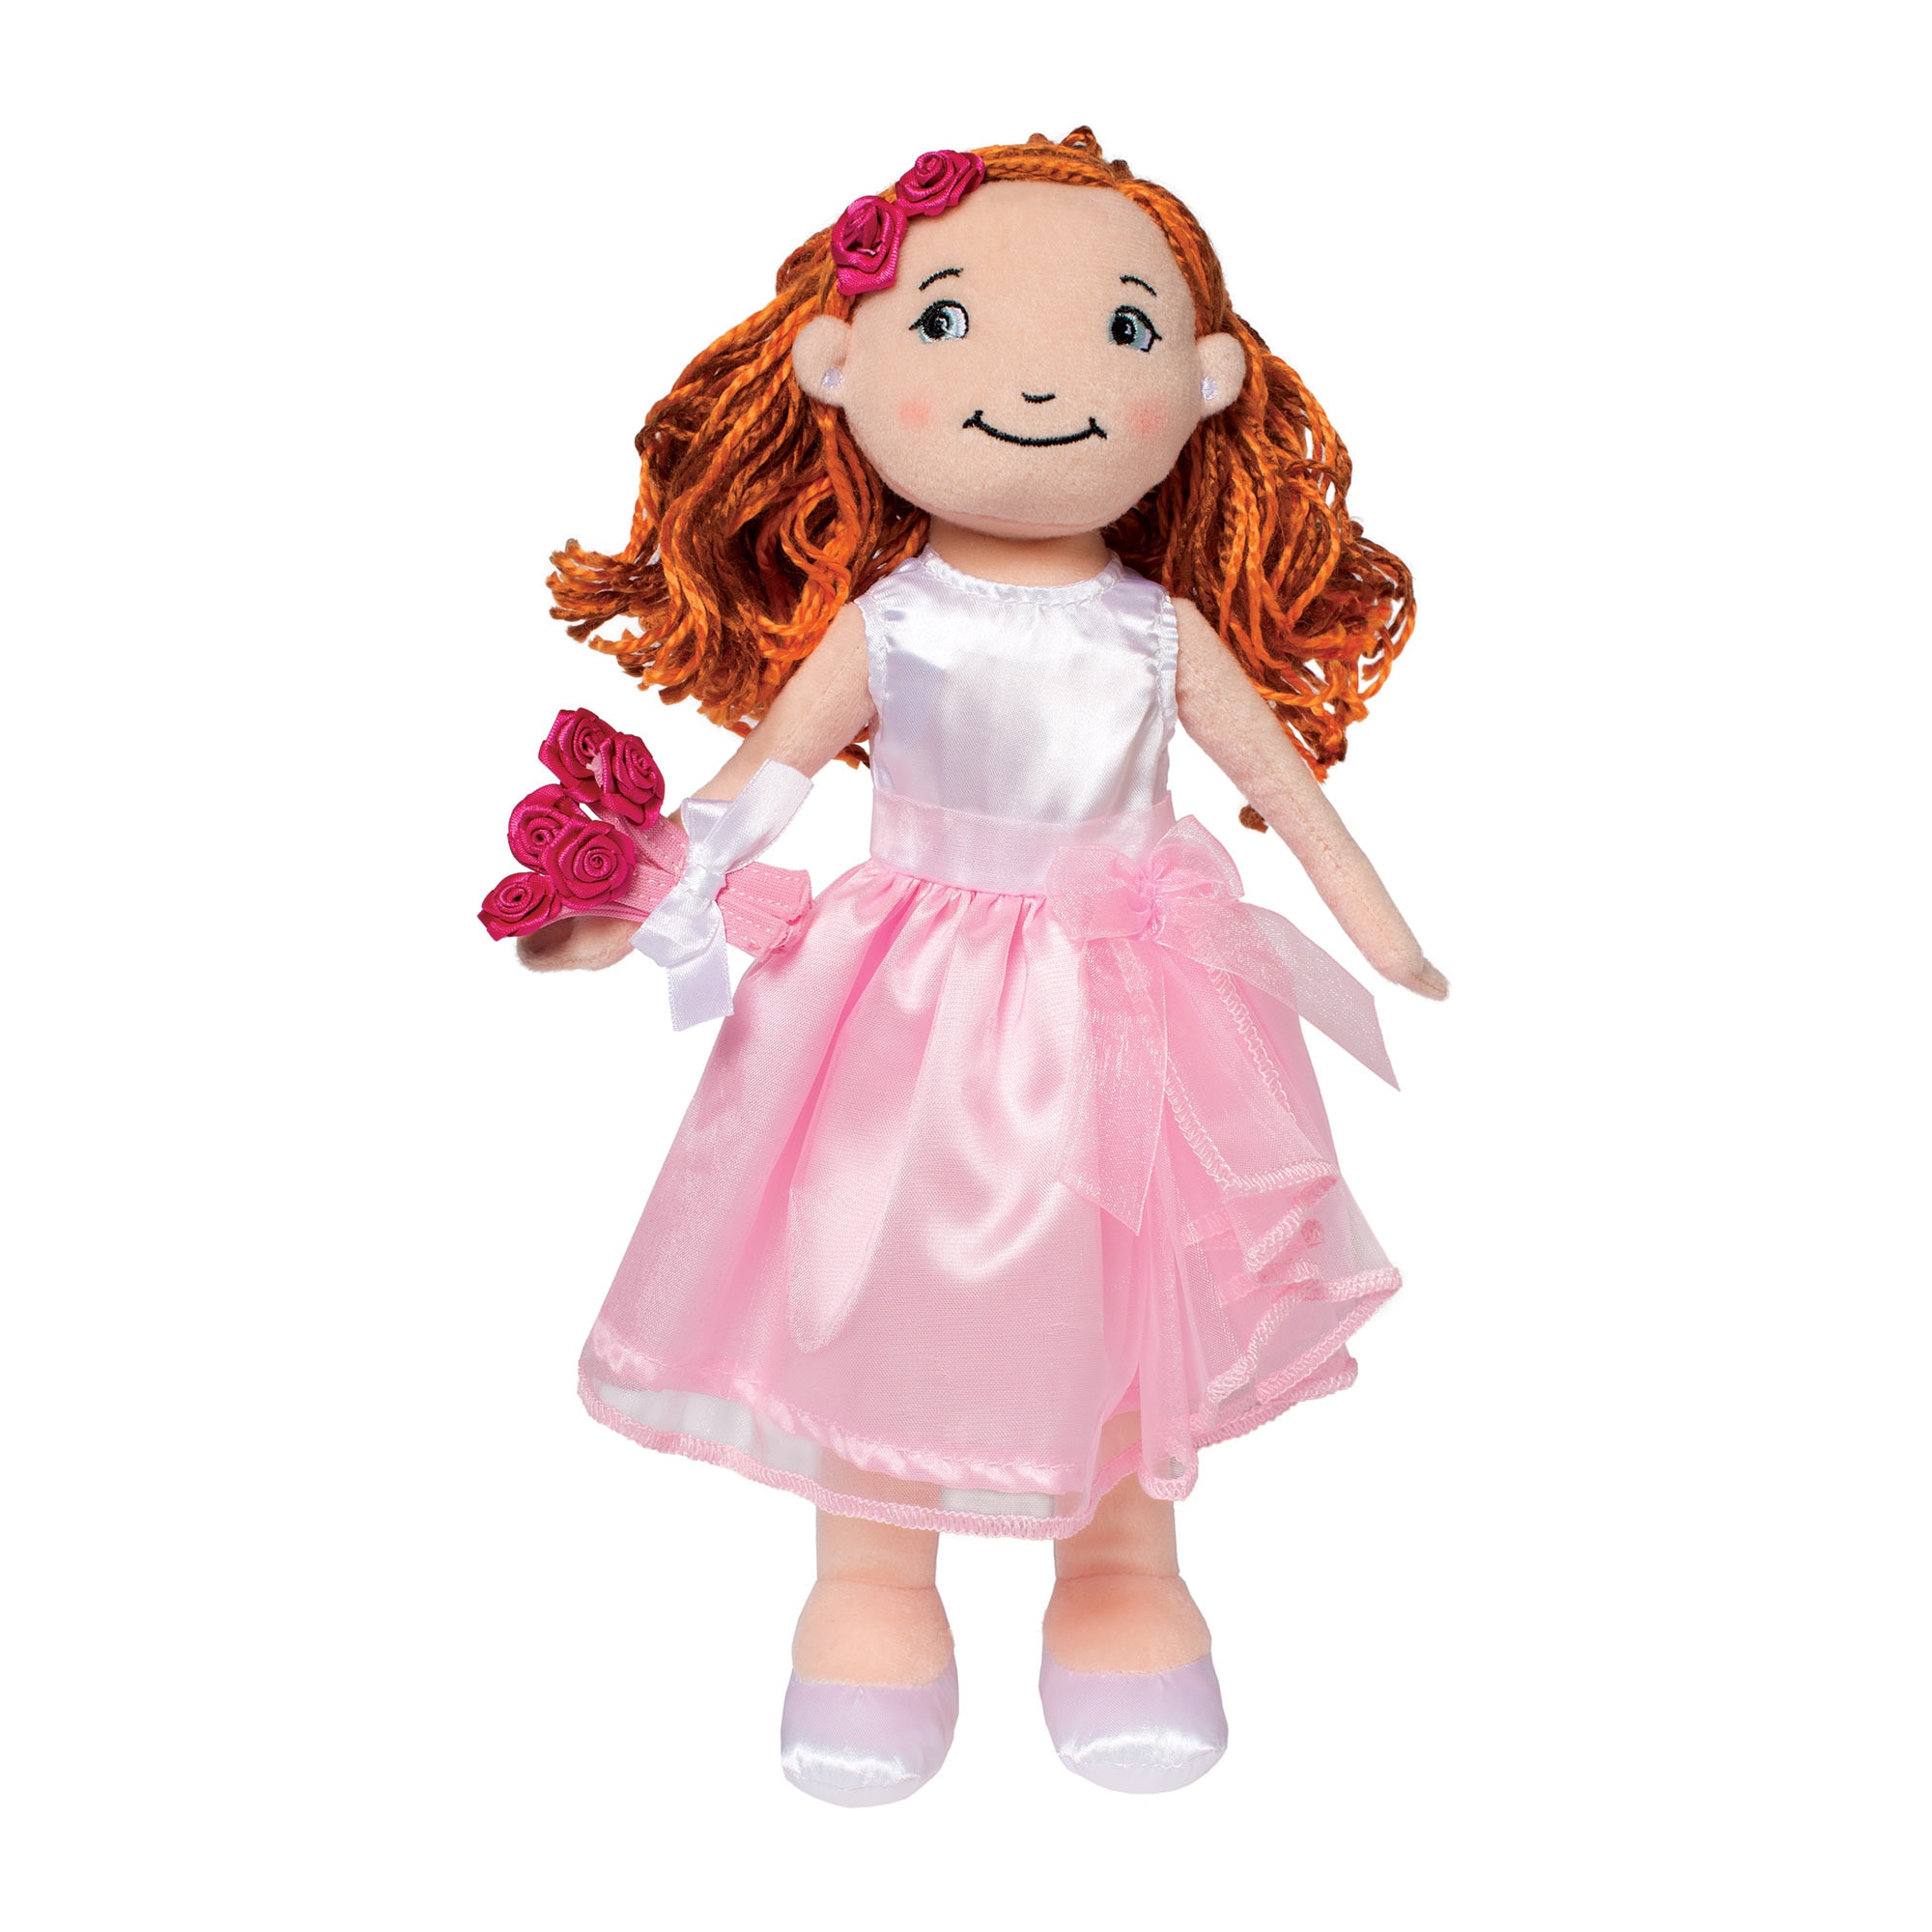 groovy girl dolls and accessories